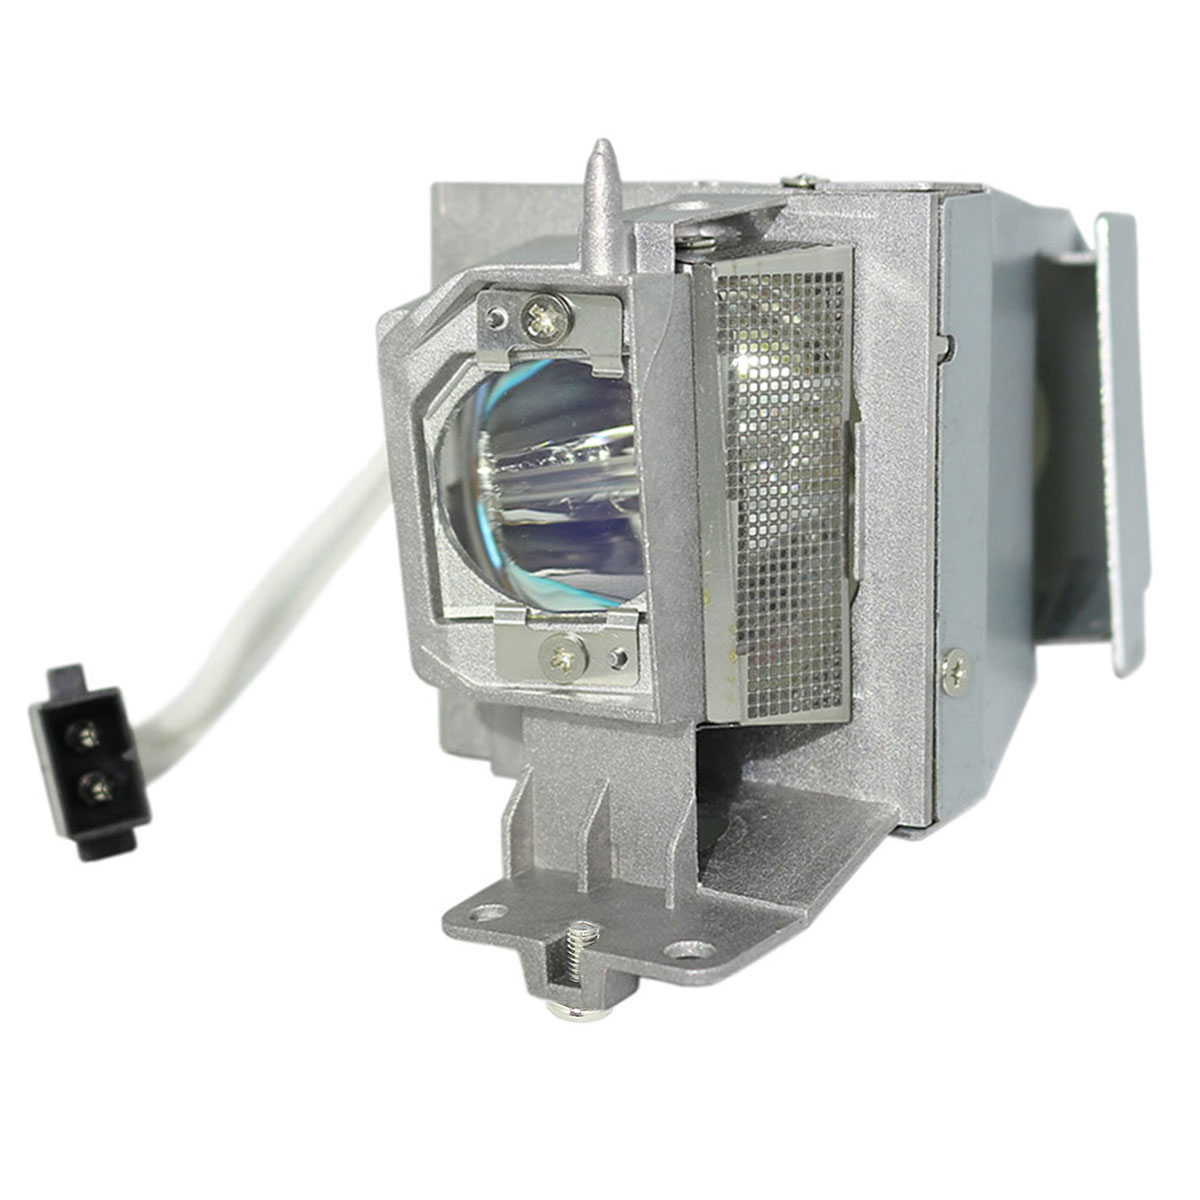 Details about   DLP Projector Lamp Bulb Module For Optoma BR323 BR326 DS345 DS346 S310E DS340E 